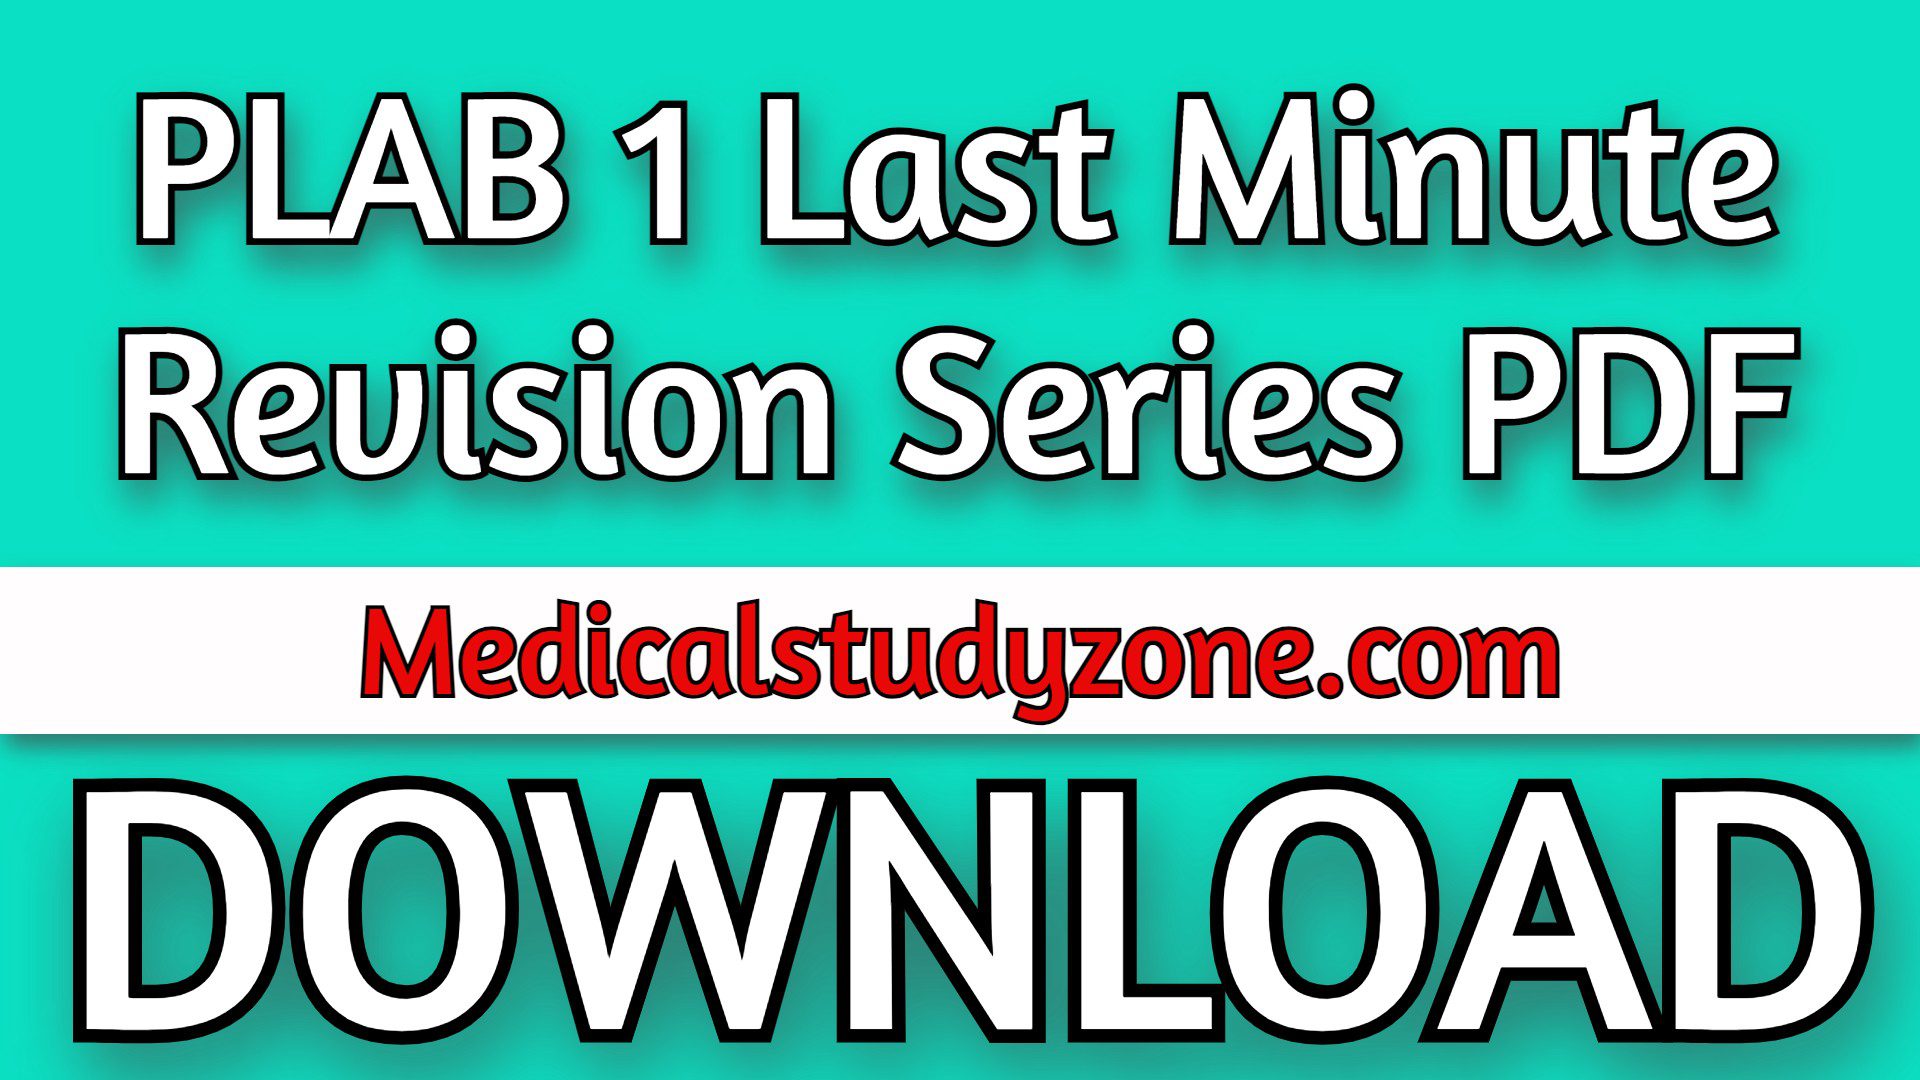 PLAB 1 Last Minute Revision Series PDF 2021 Free Download